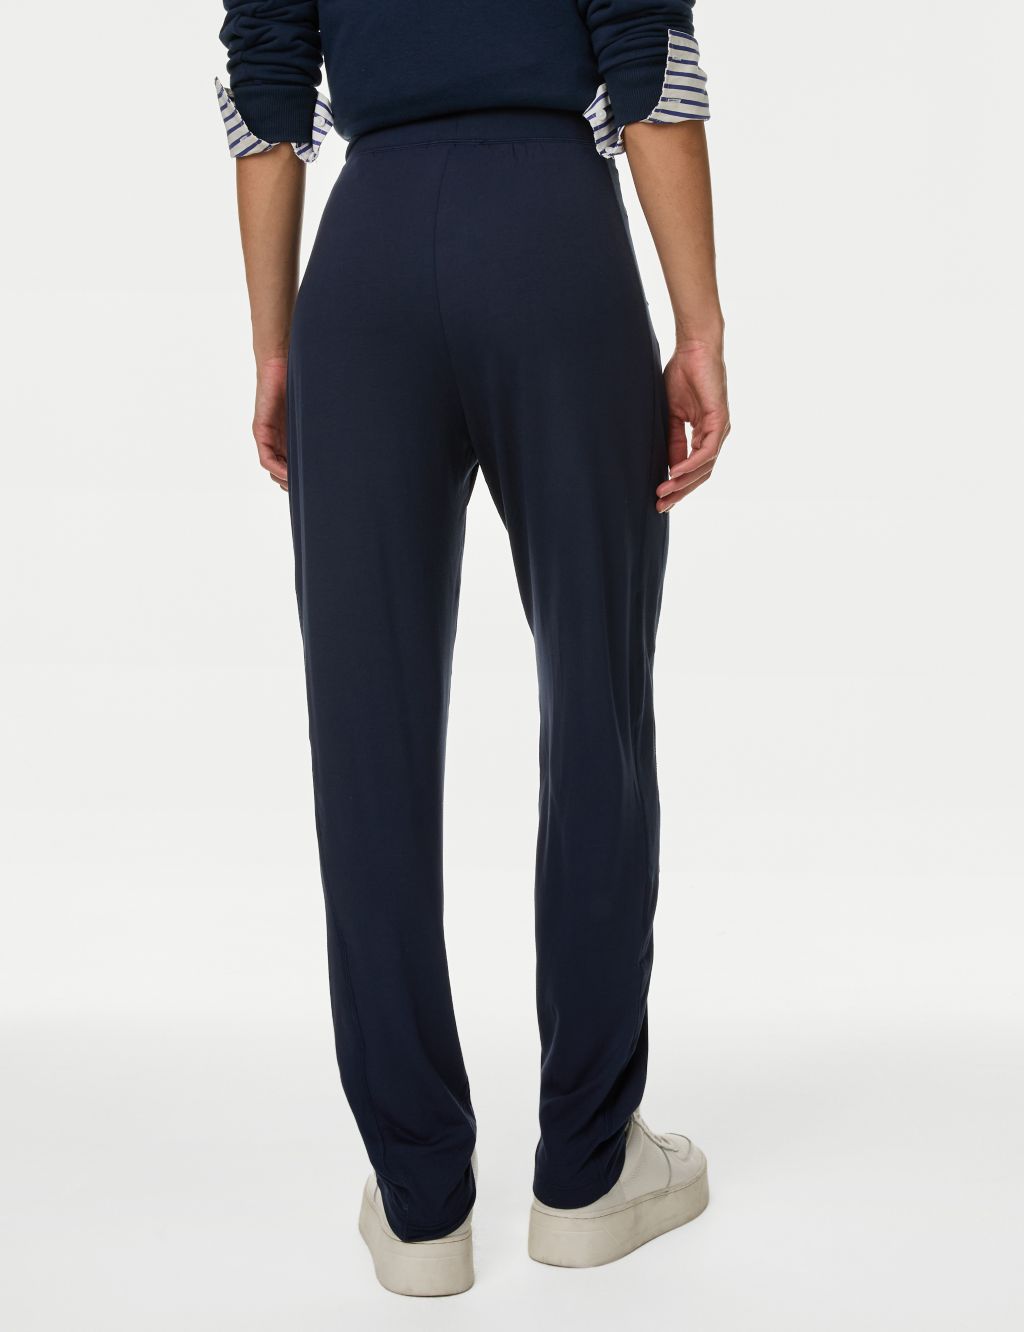 Jersey Tapered Ankle Grazer Trousers image 5